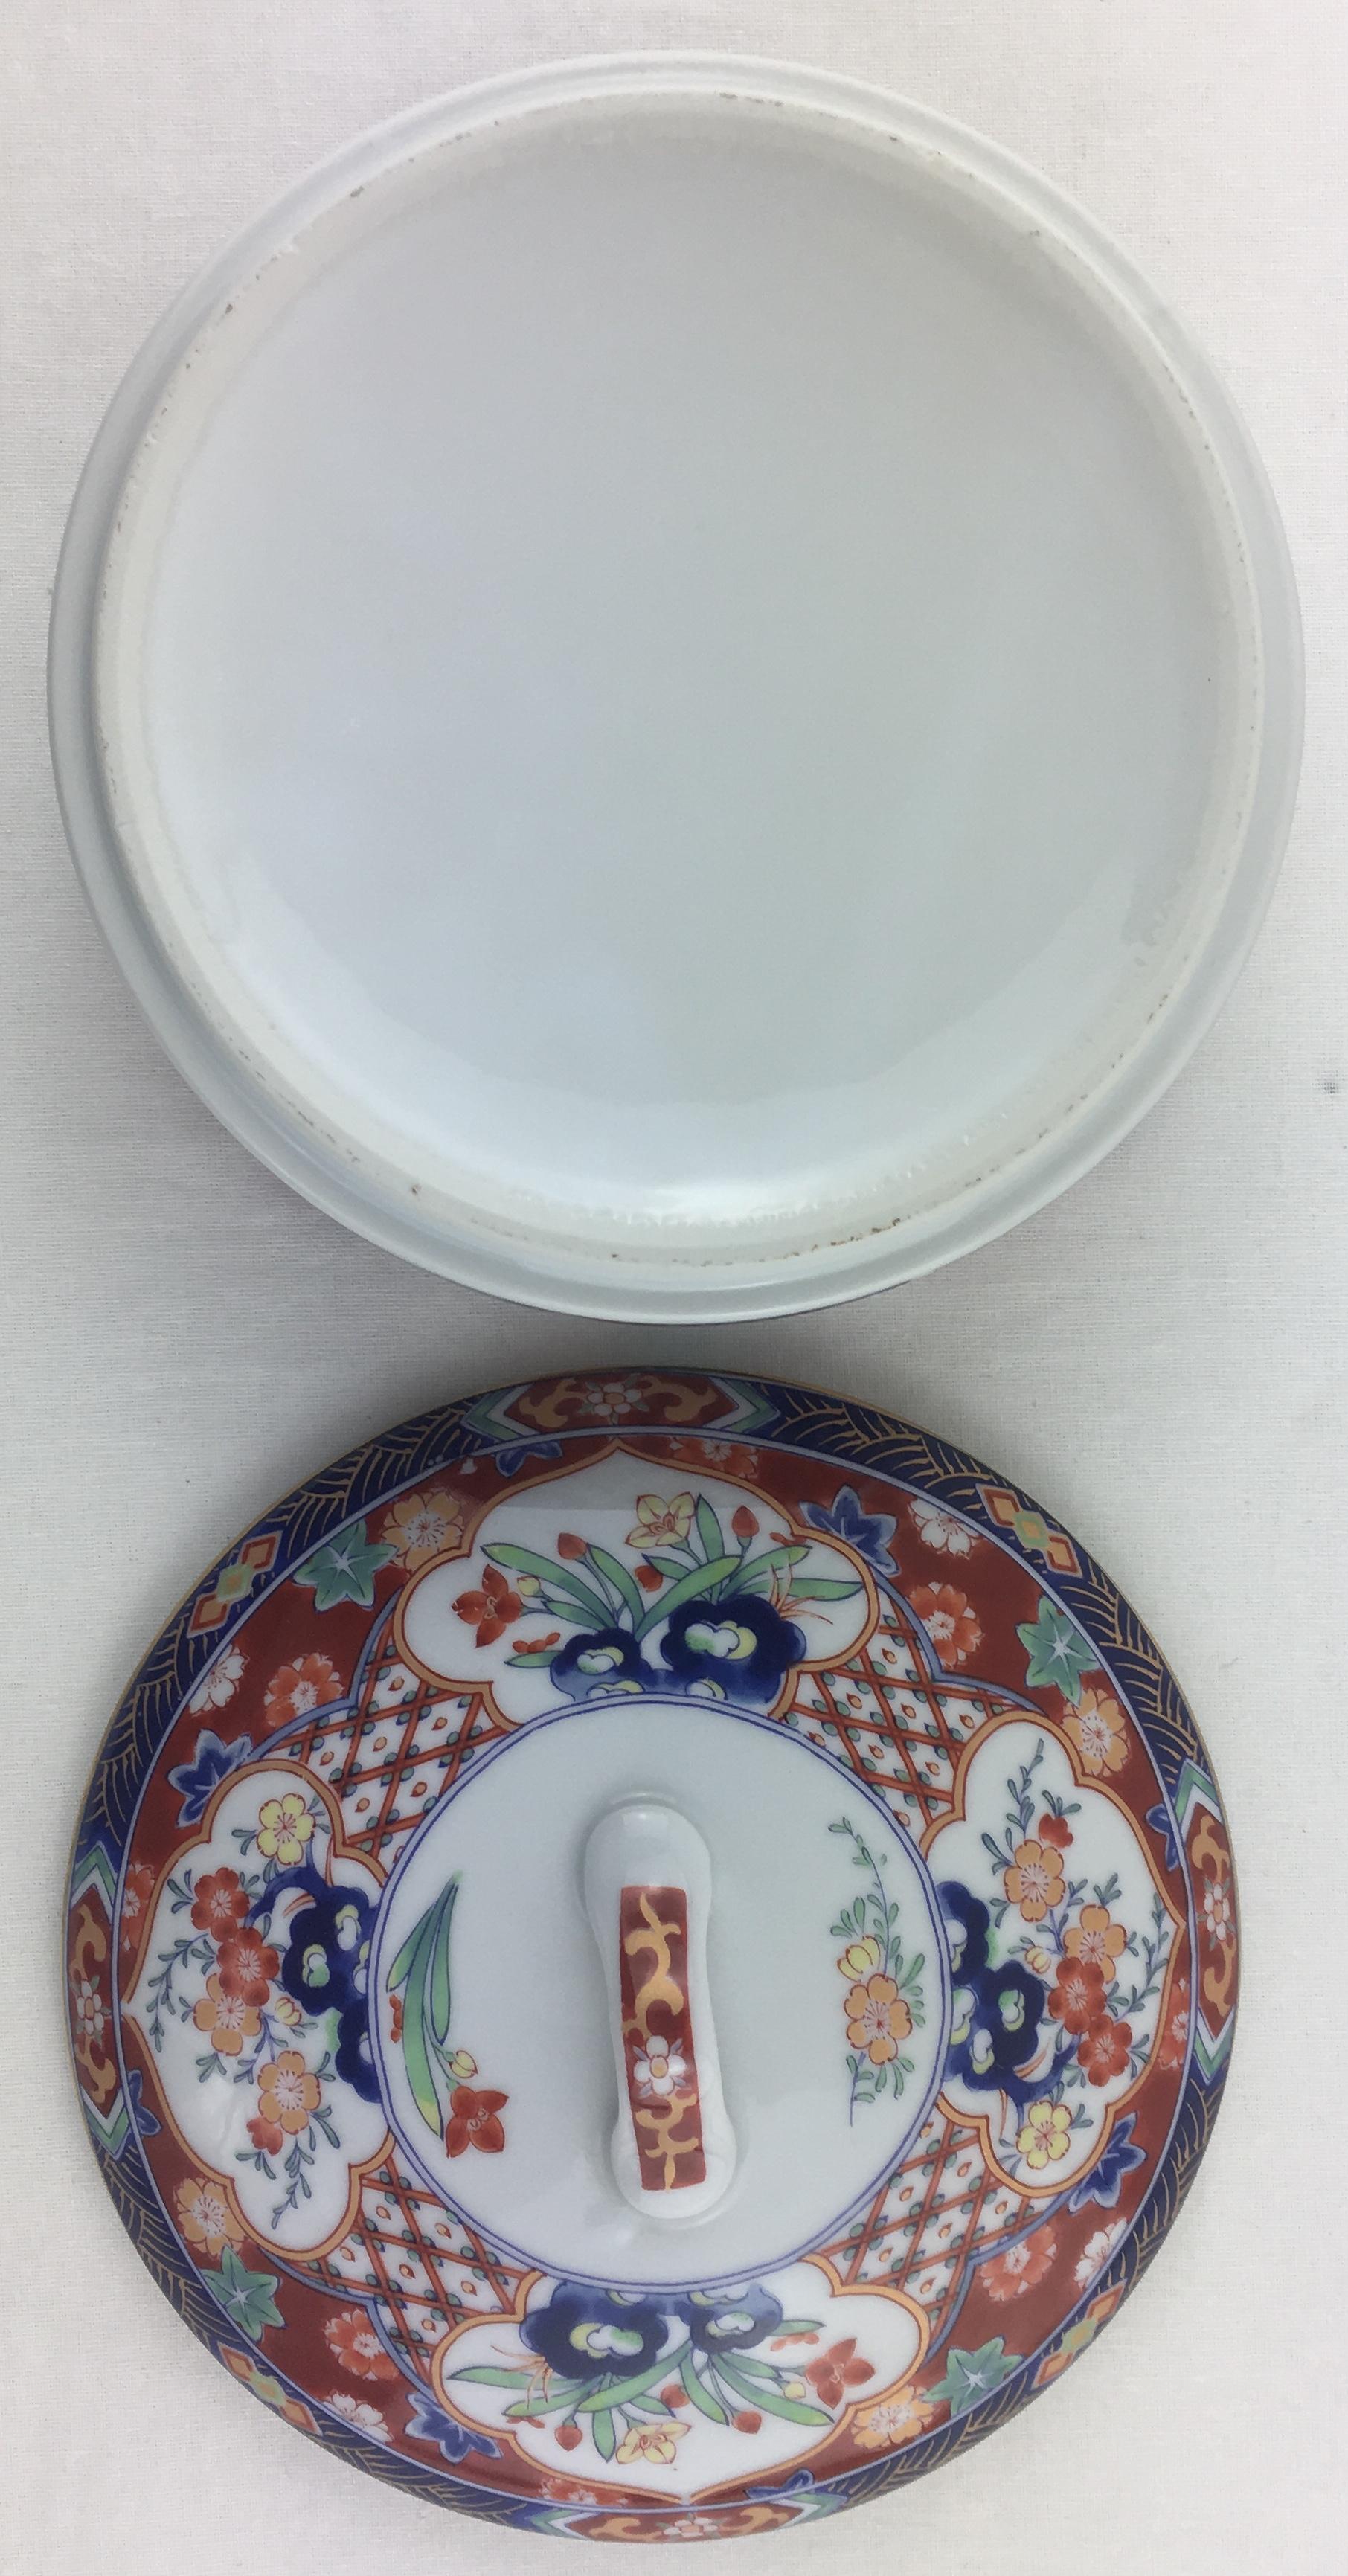 Japanese Hand-Painted Porcelain Lidded Serving Dish, Trinket or Jewelry Box For Sale 1